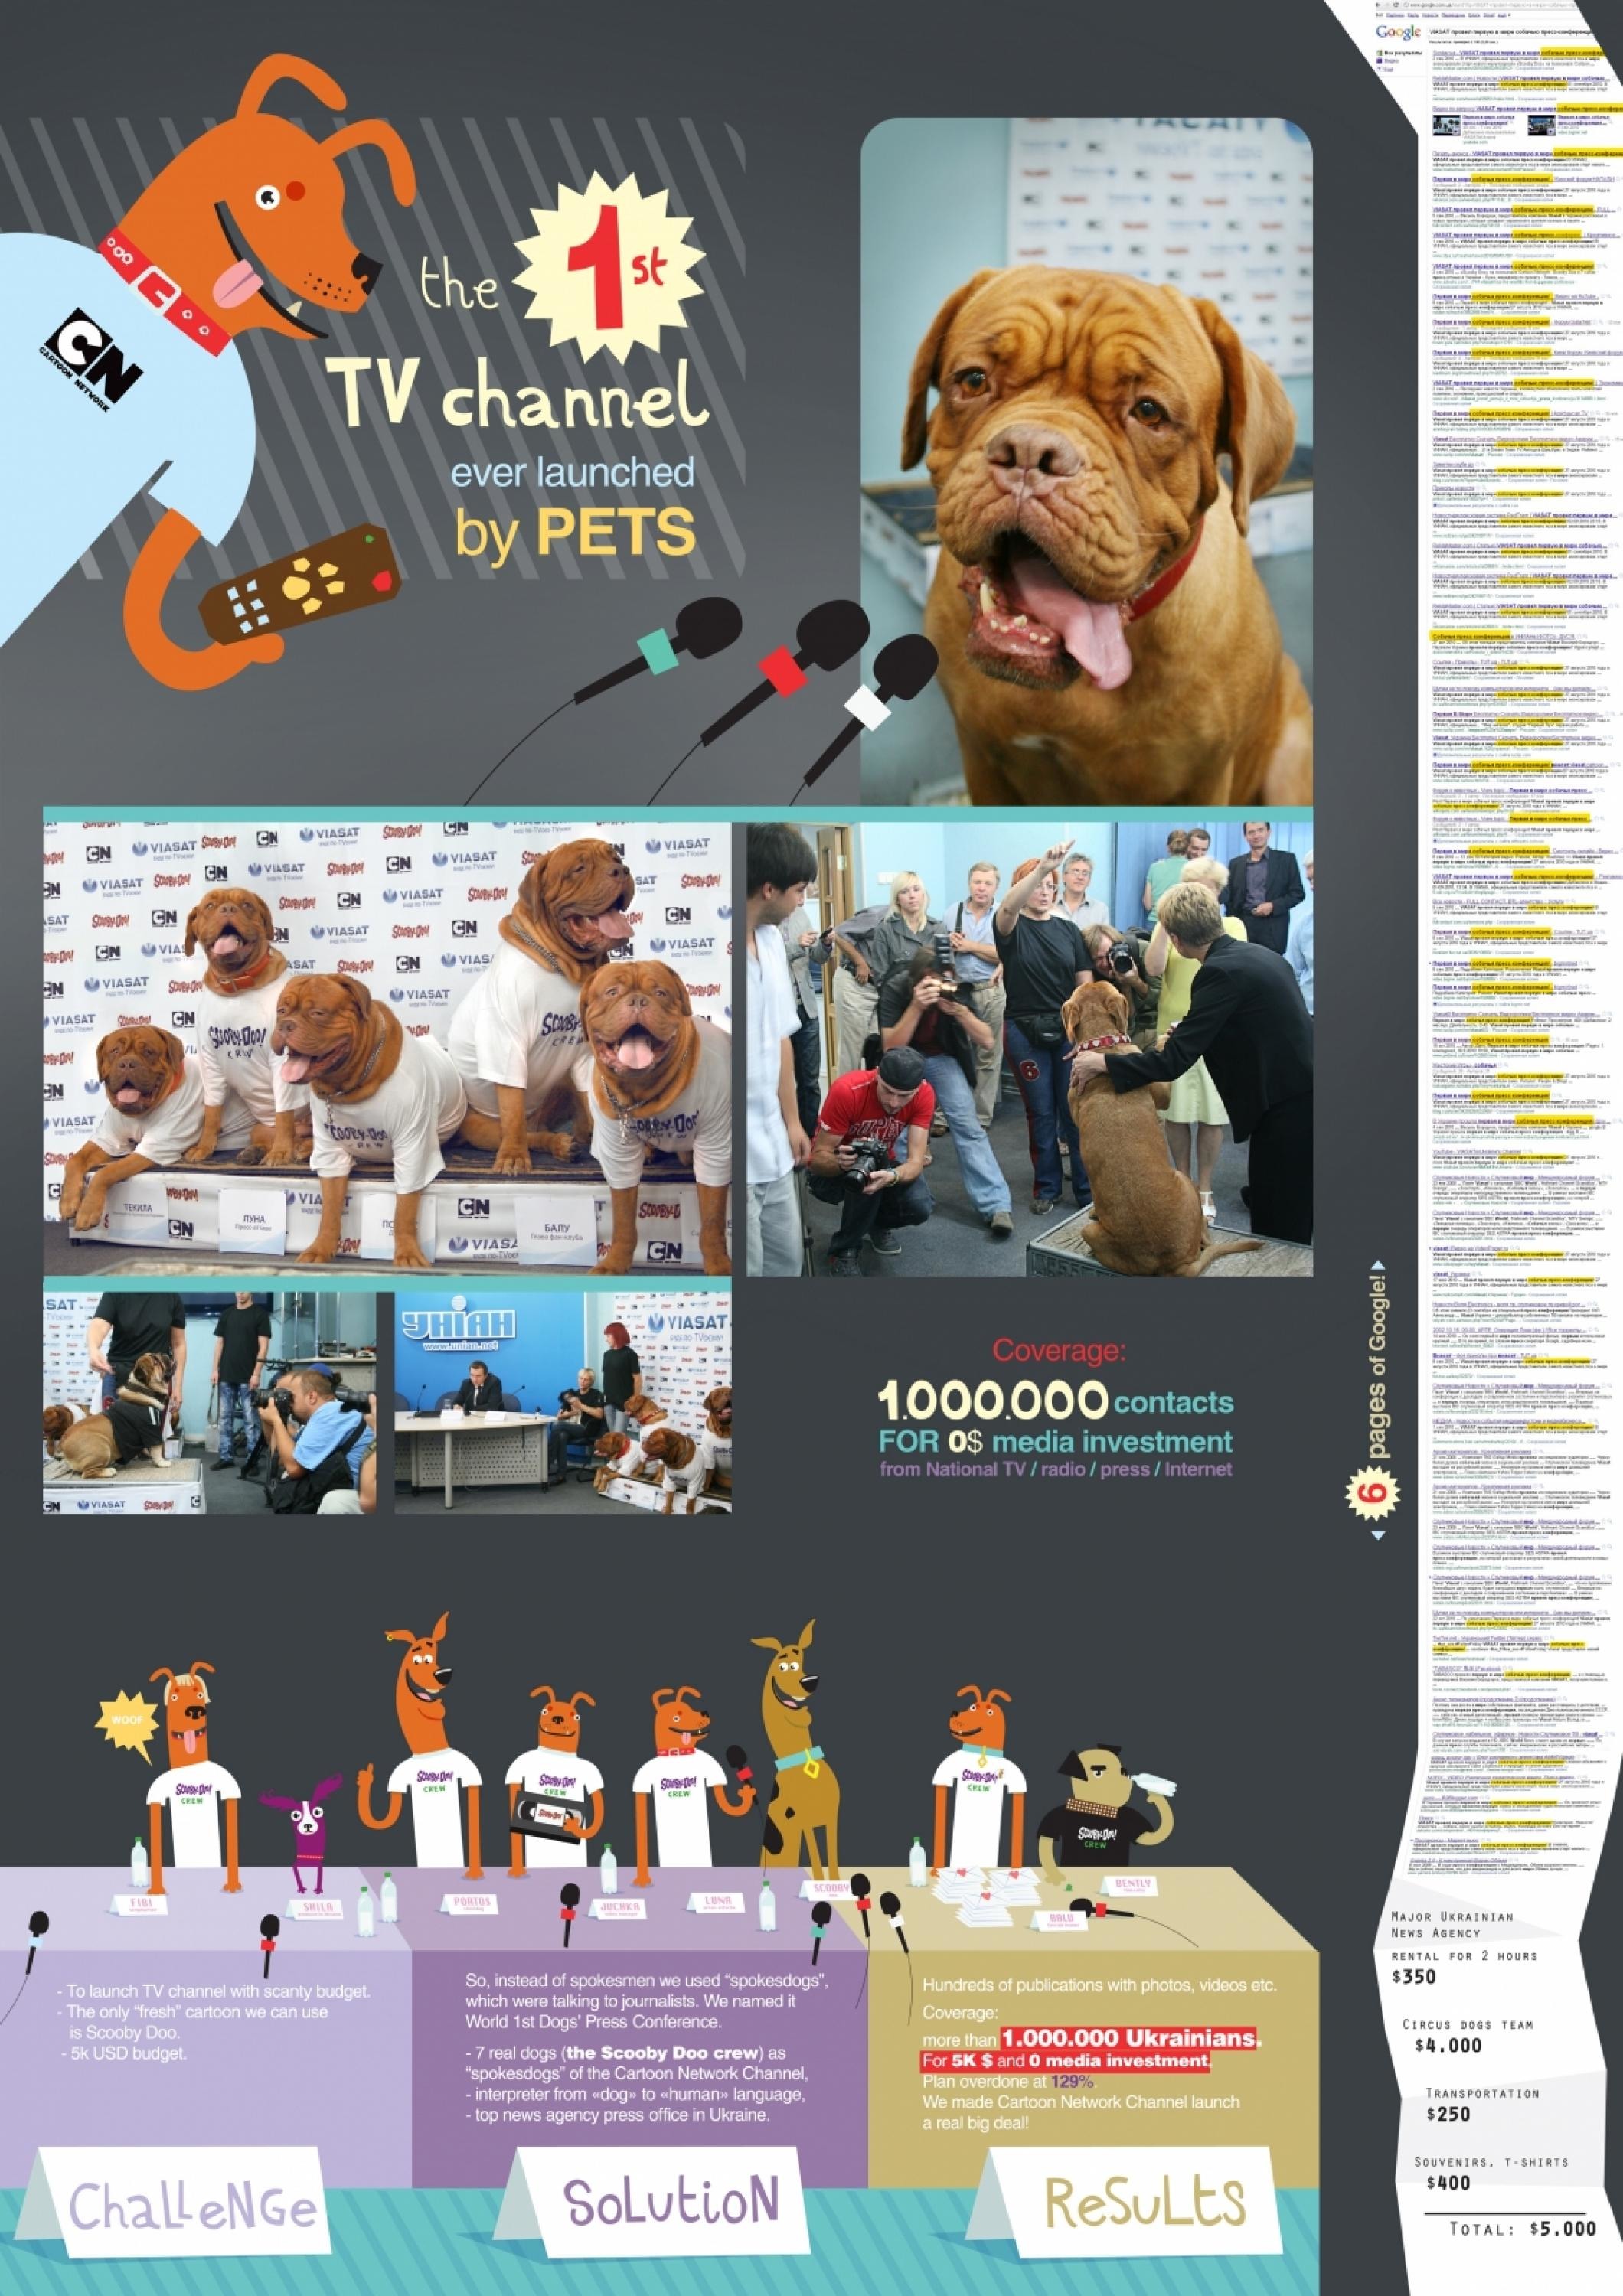 WORLD FIRST DOGS' PRESS CONFERENCE